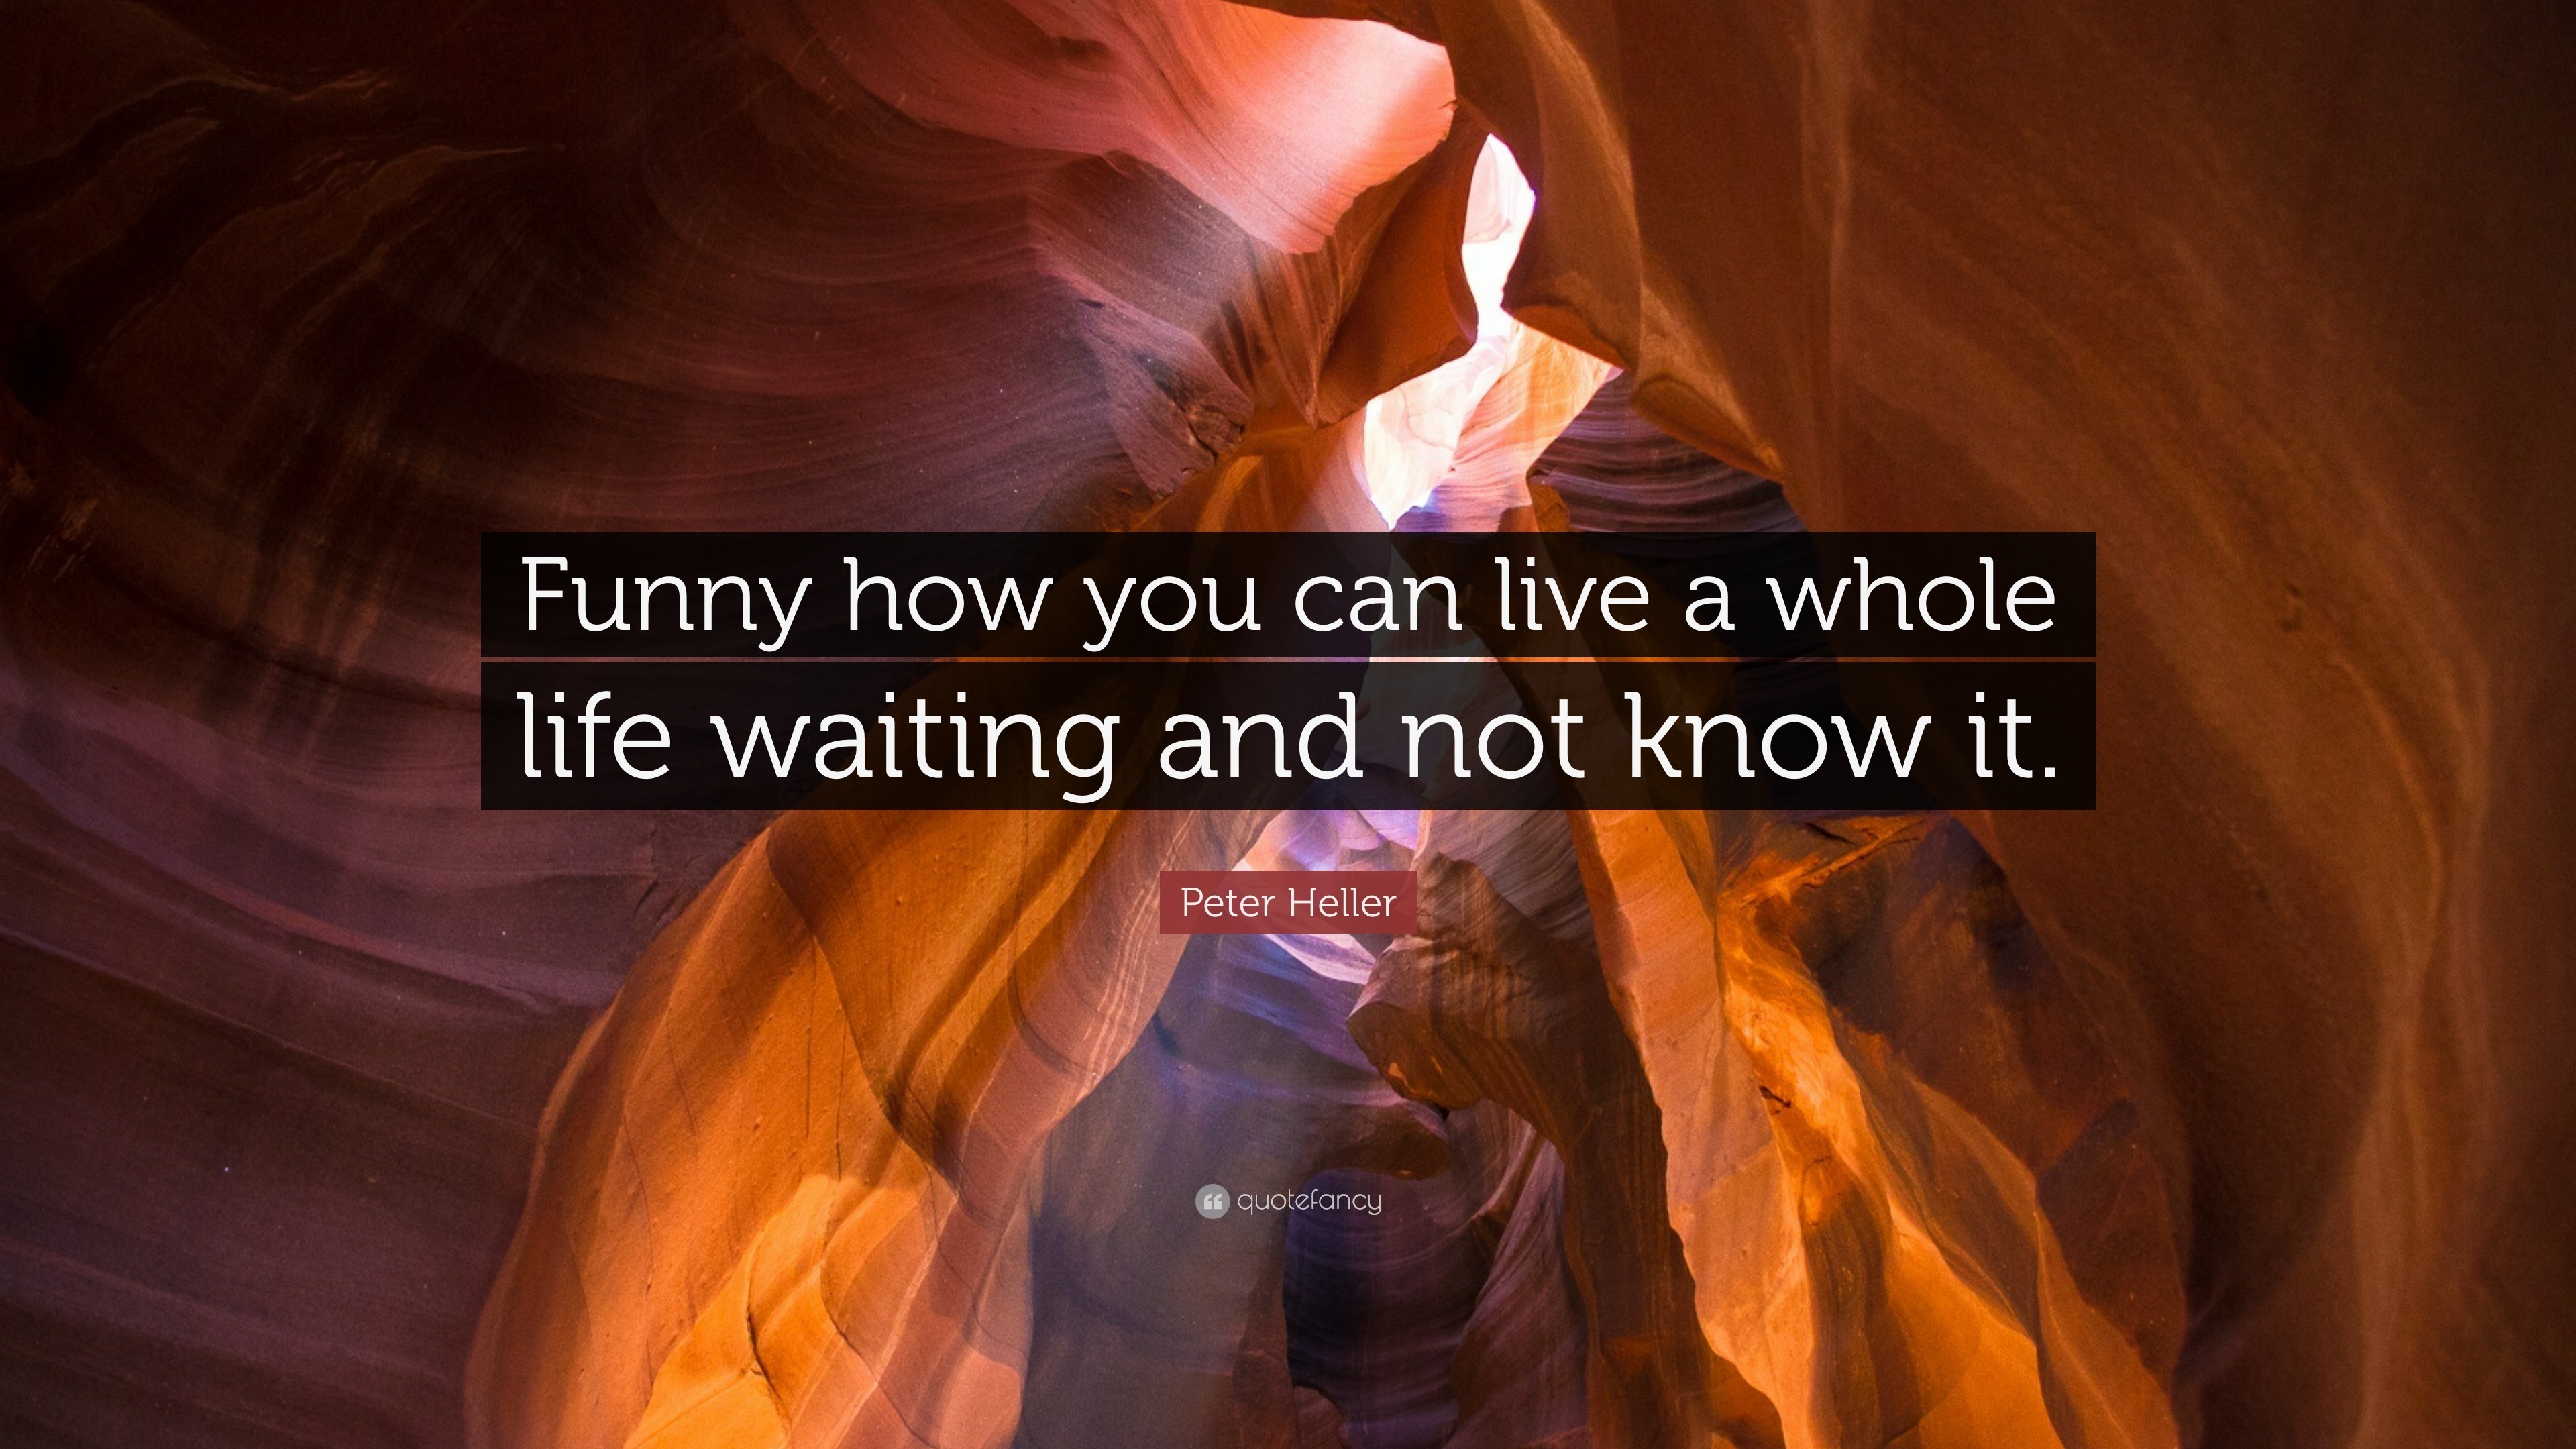 Peter Heller Quote: “Funny how you can live a whole life waiting and not  know it.”